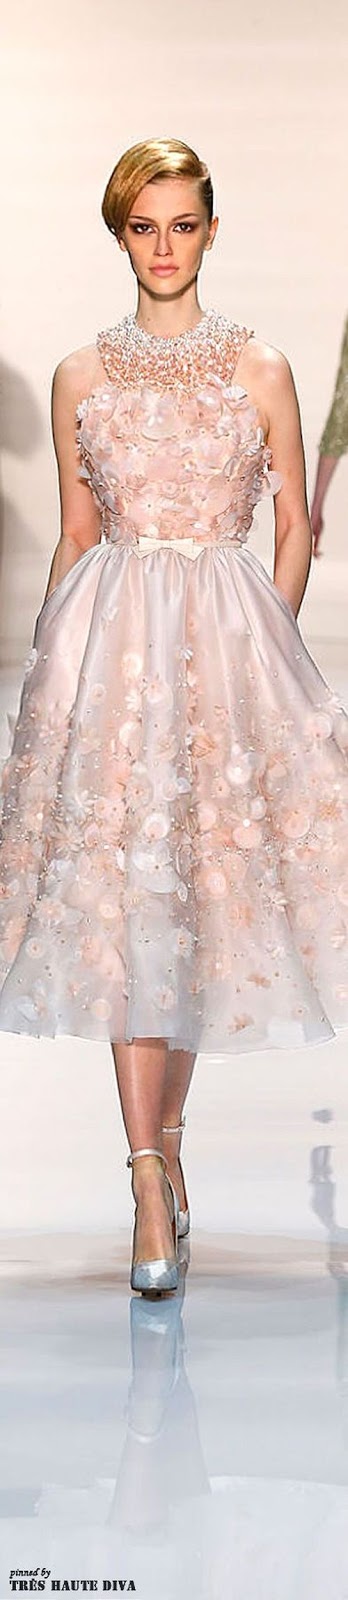 runway look: Georgea Hobeika S/S 2014 Couture pink floral dress